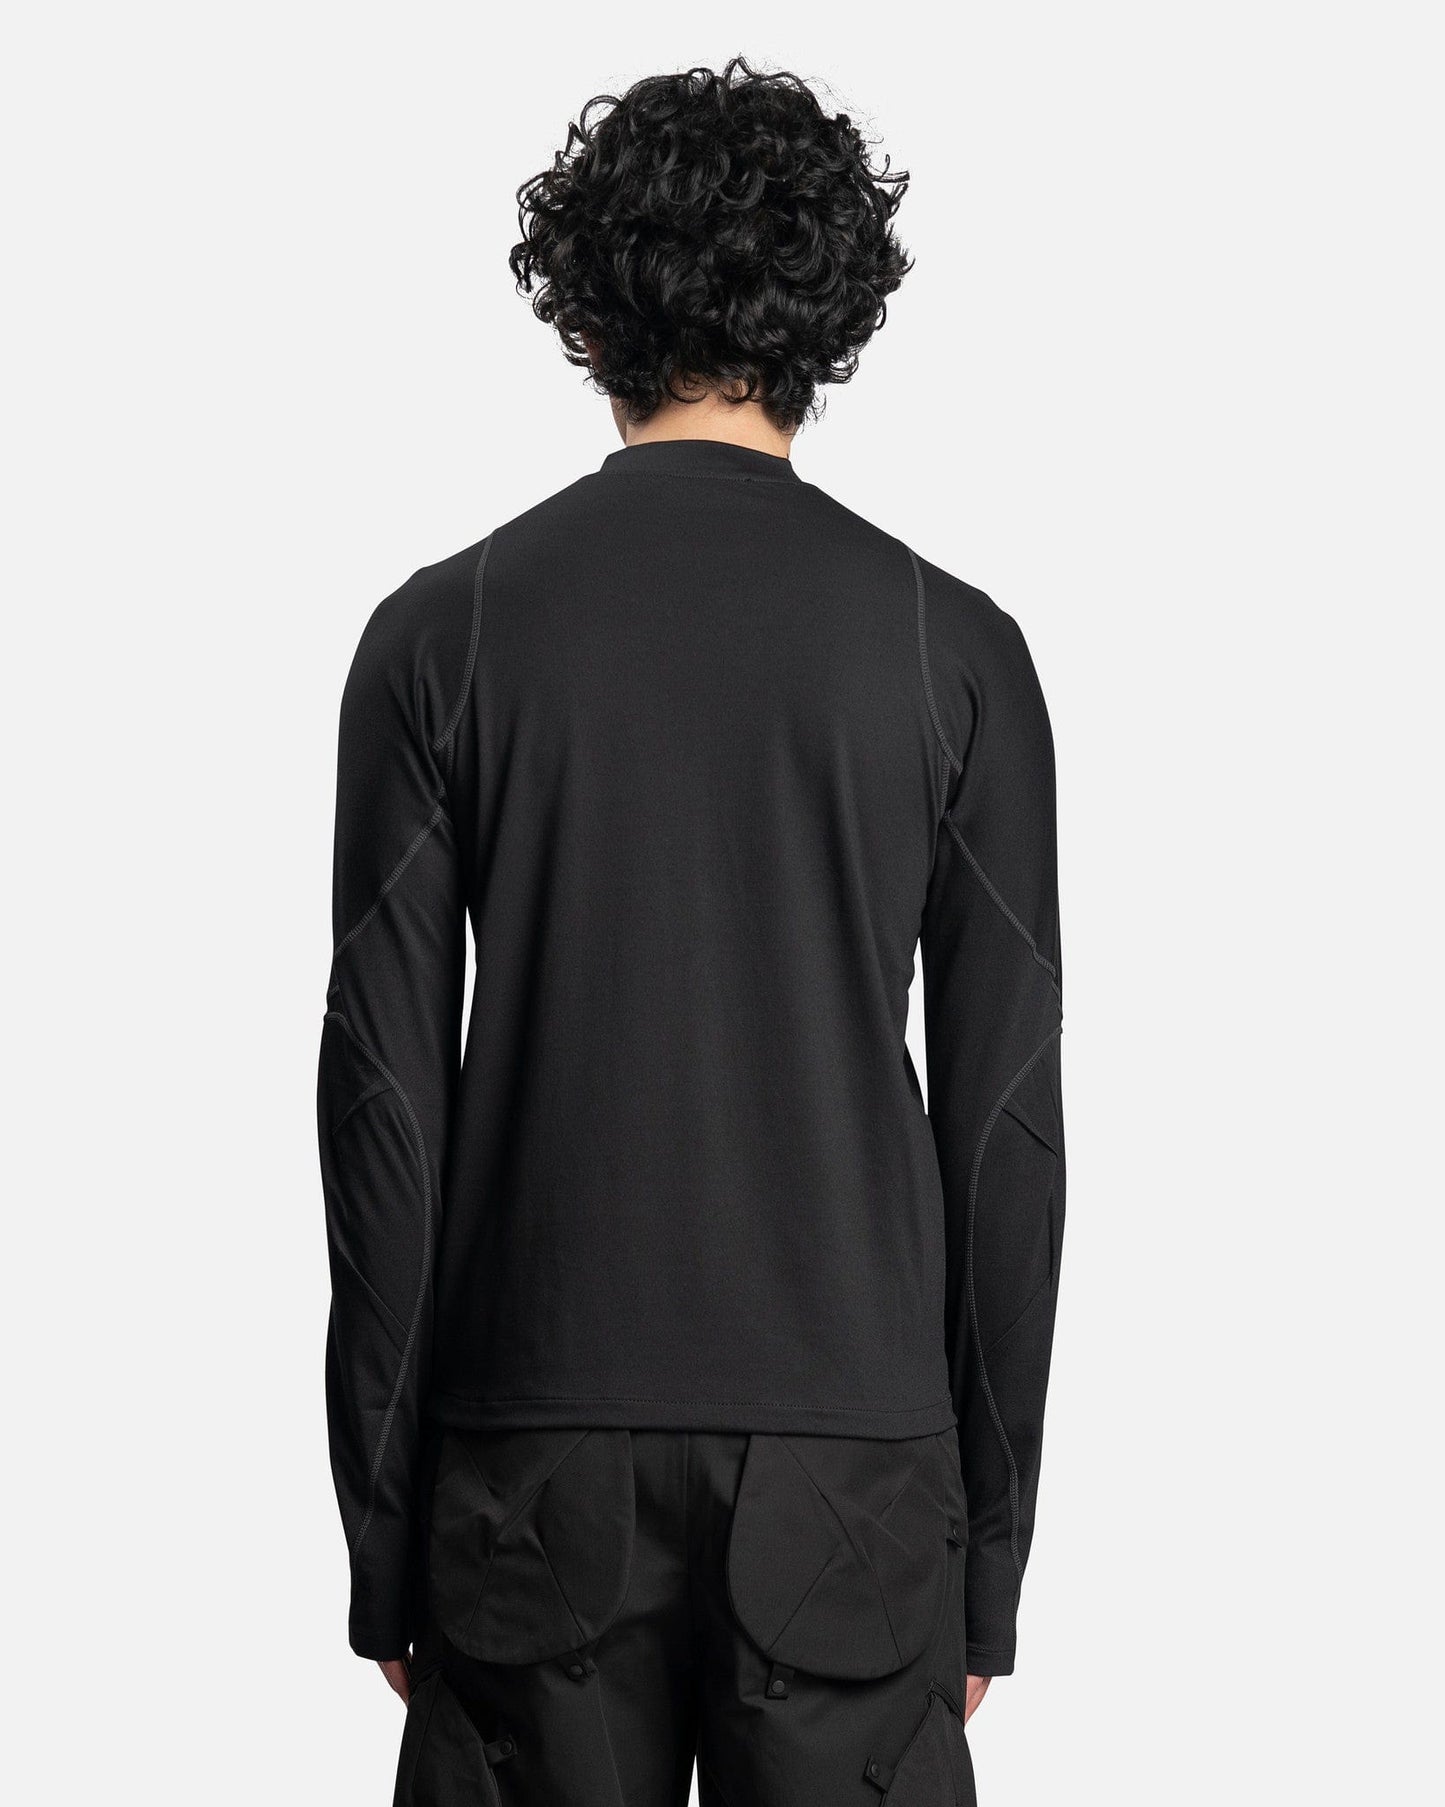 POST ARCHIVE FACTION (P.A.F) Men's T-Shirts 5.0 Long Sleeve Right T-Shirt in Black